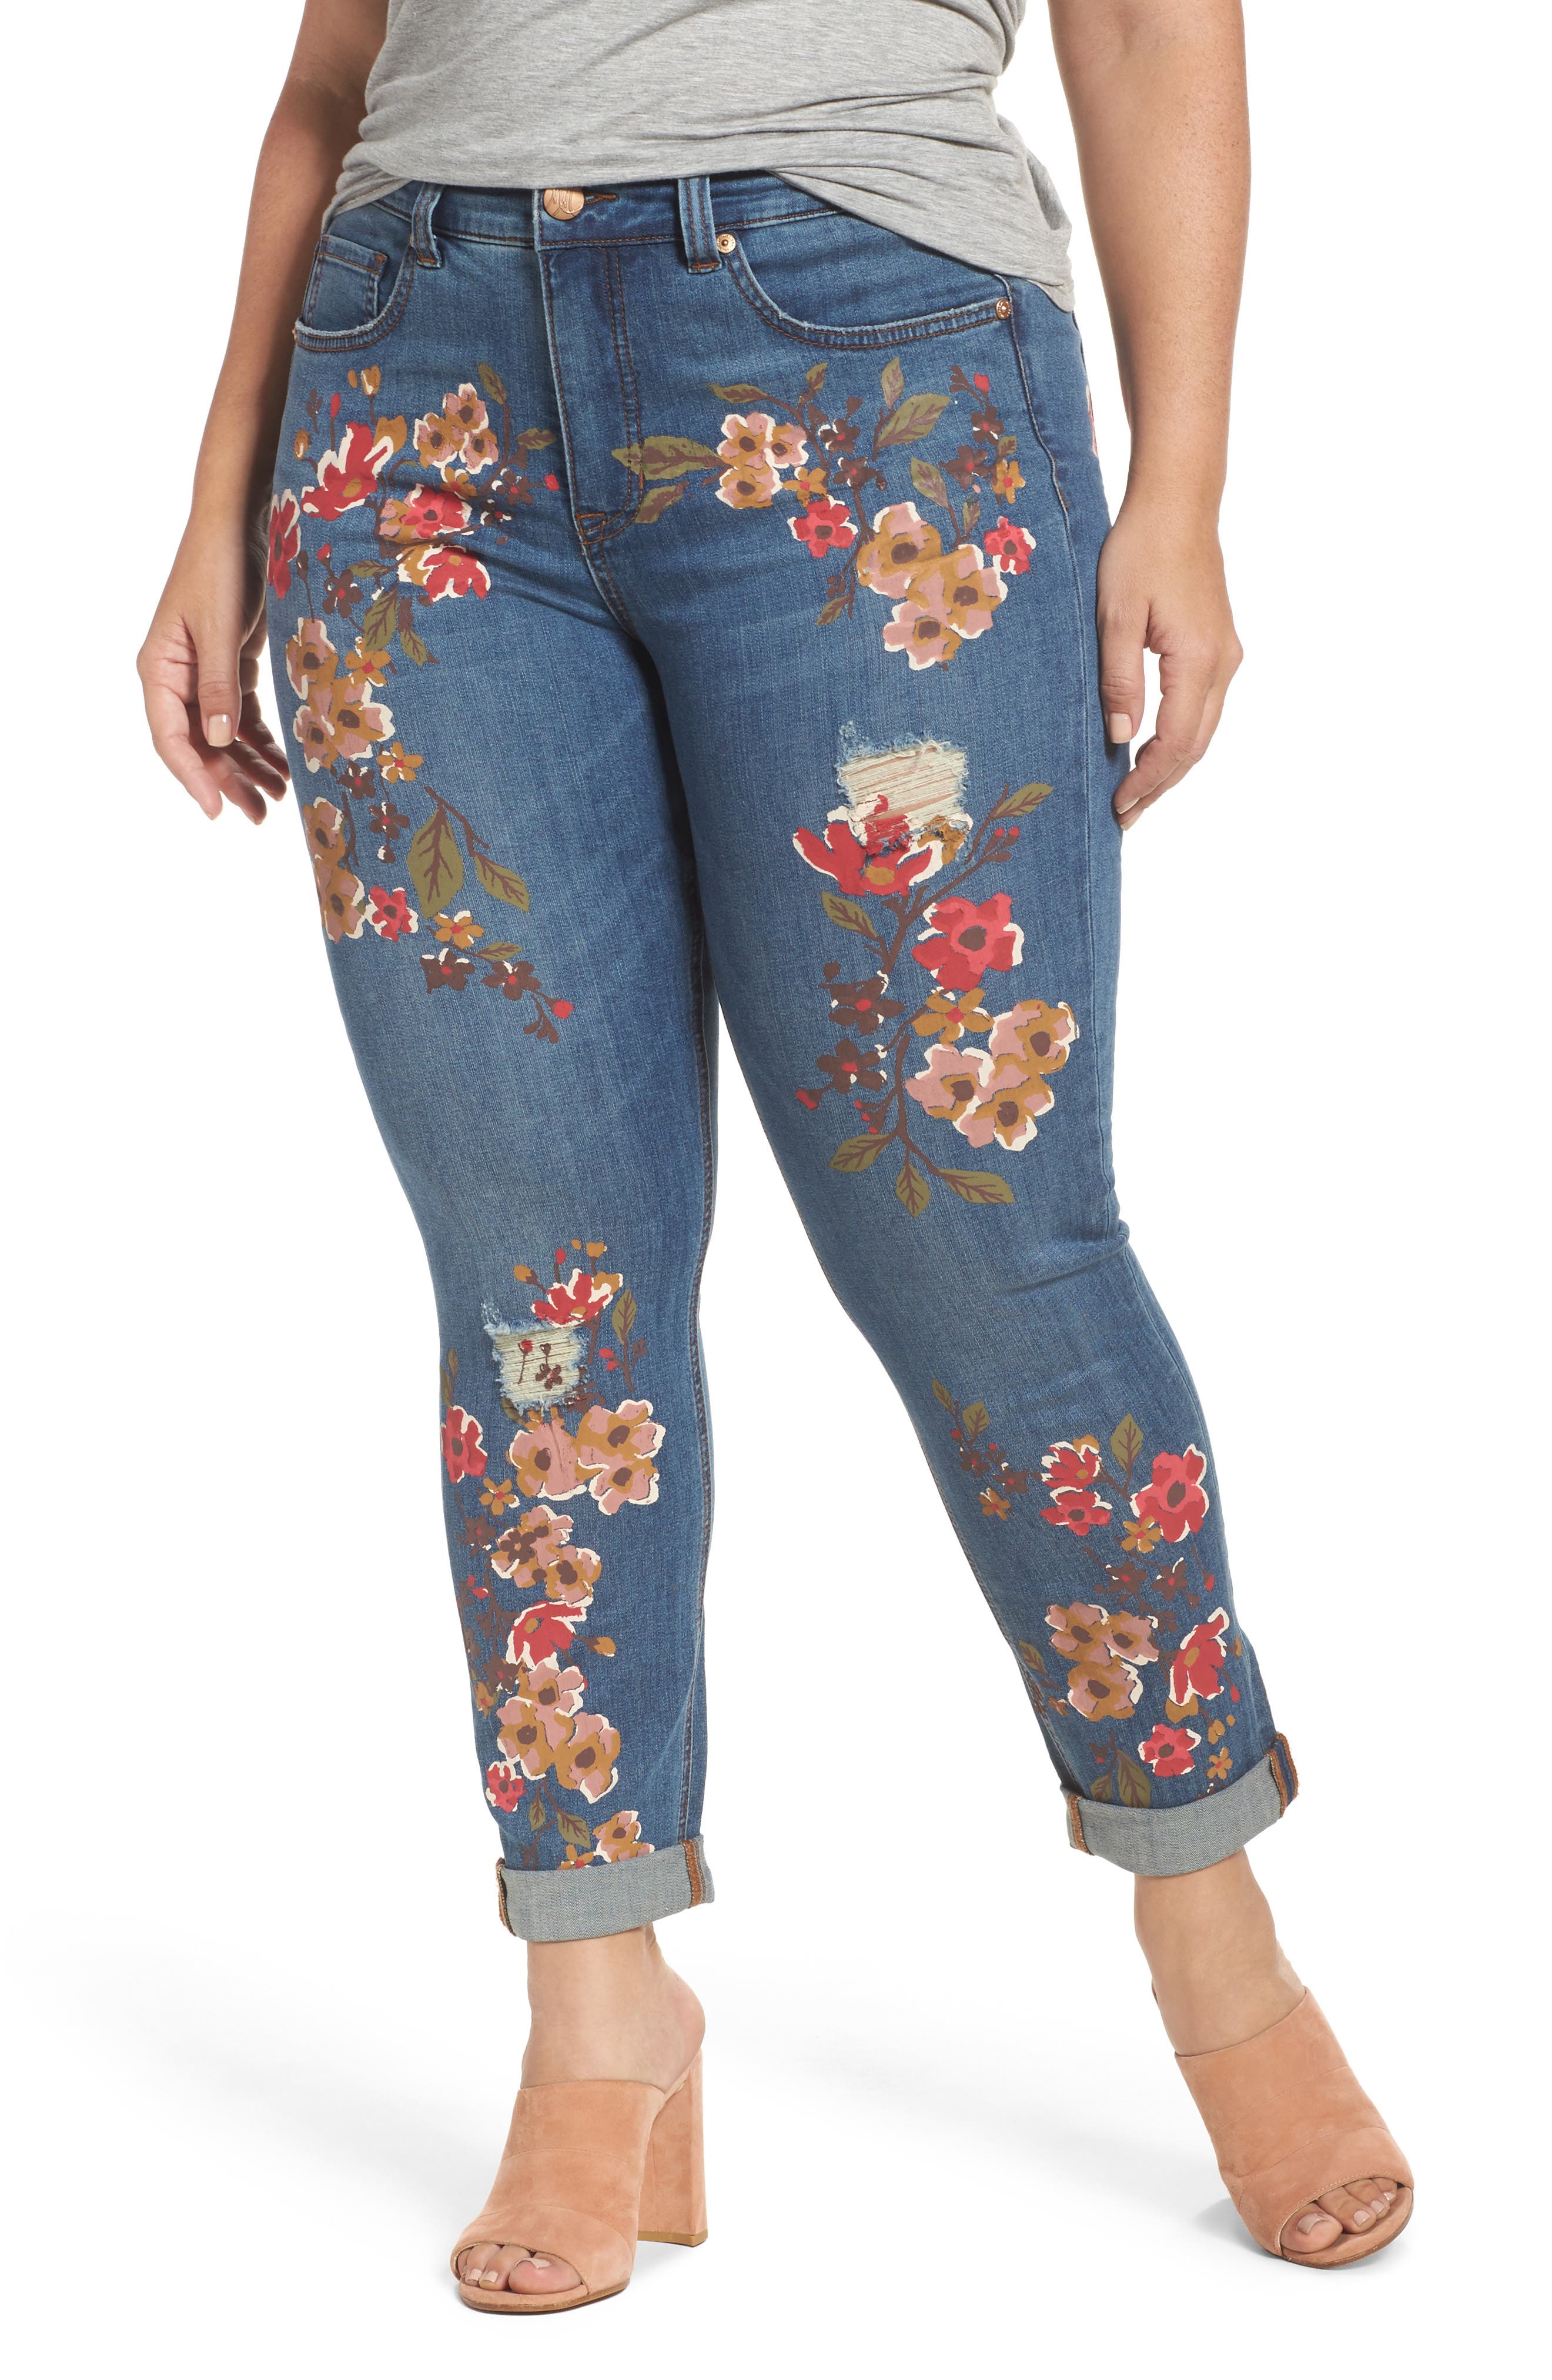 painted flowers on jeans